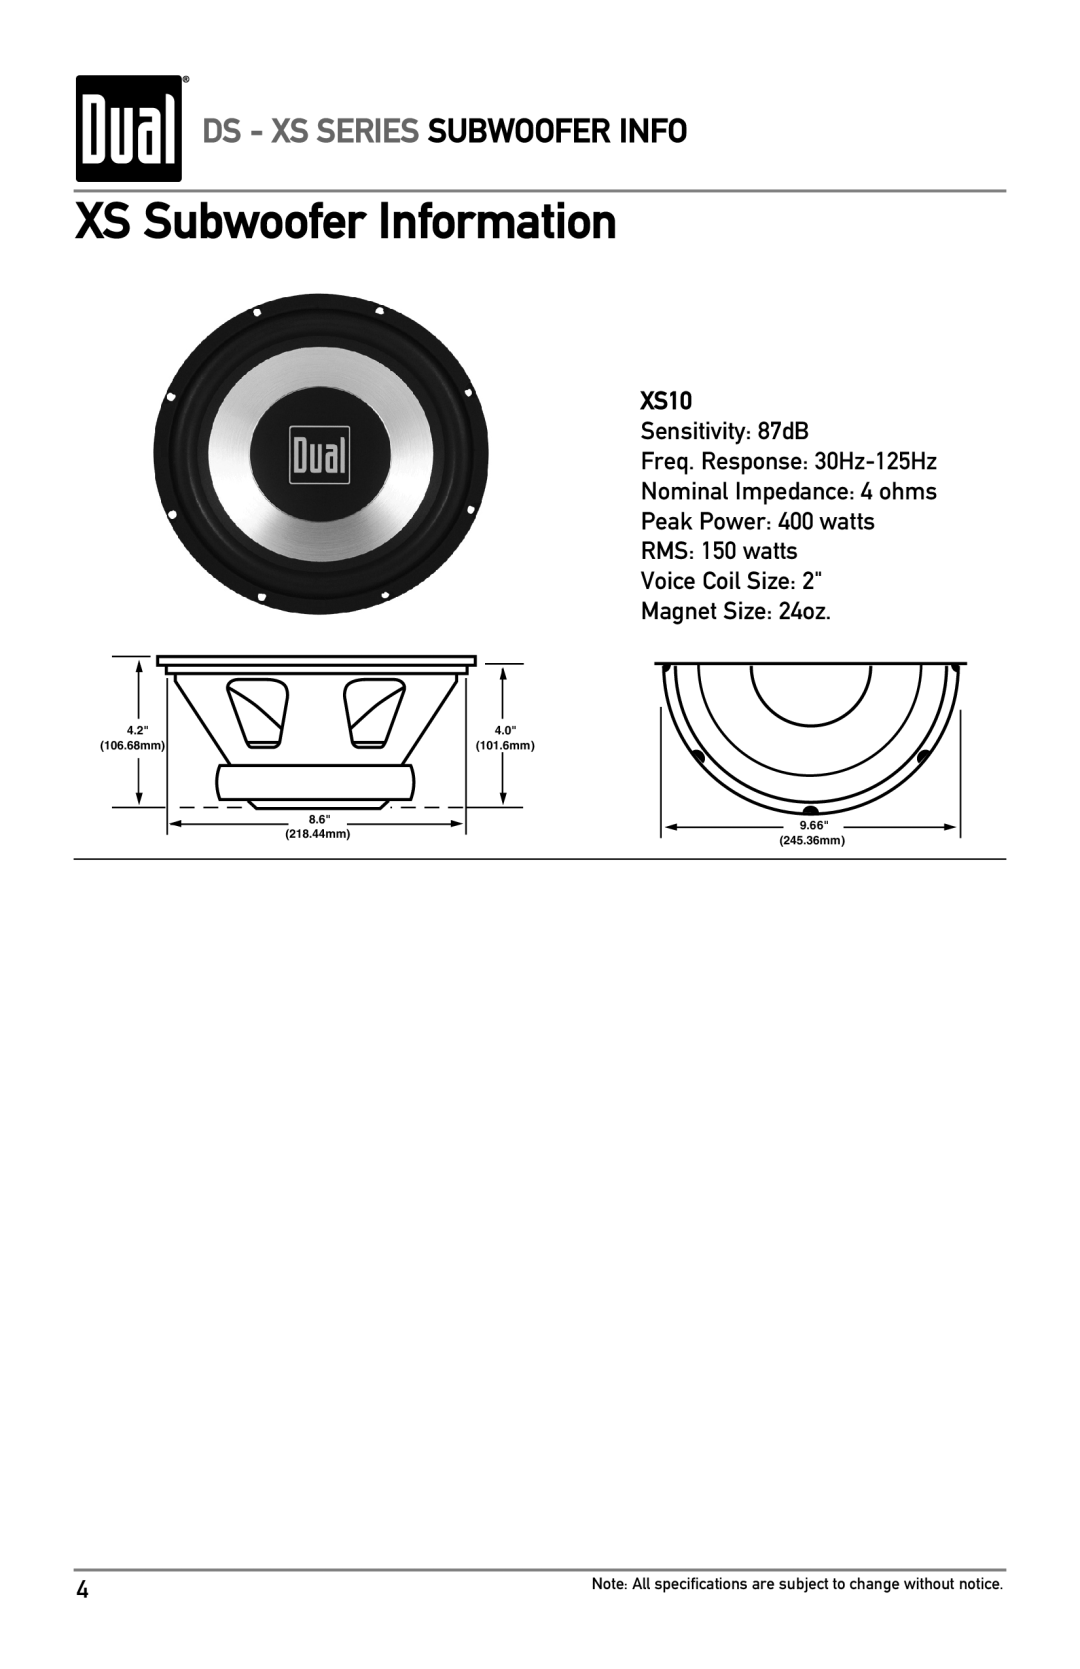 Dual DS12, DS10 owner manual XS Subwoofer Information, Ds - Xs Series Subwoofer Info, XS10, 4.2 106.68mm 8.6 218.44mm 